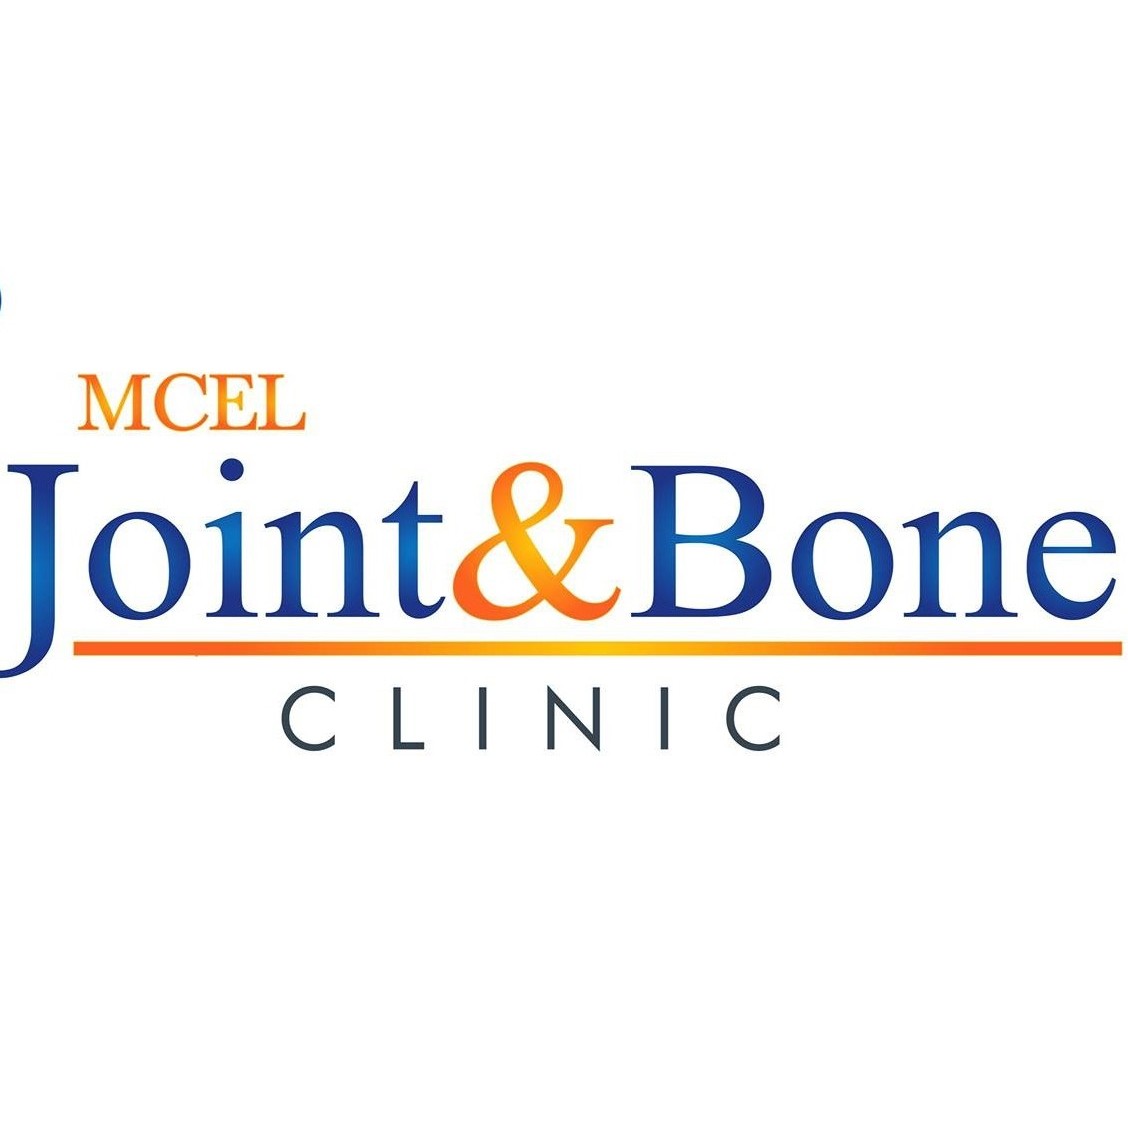 MCEL Joint and Bone Clinic